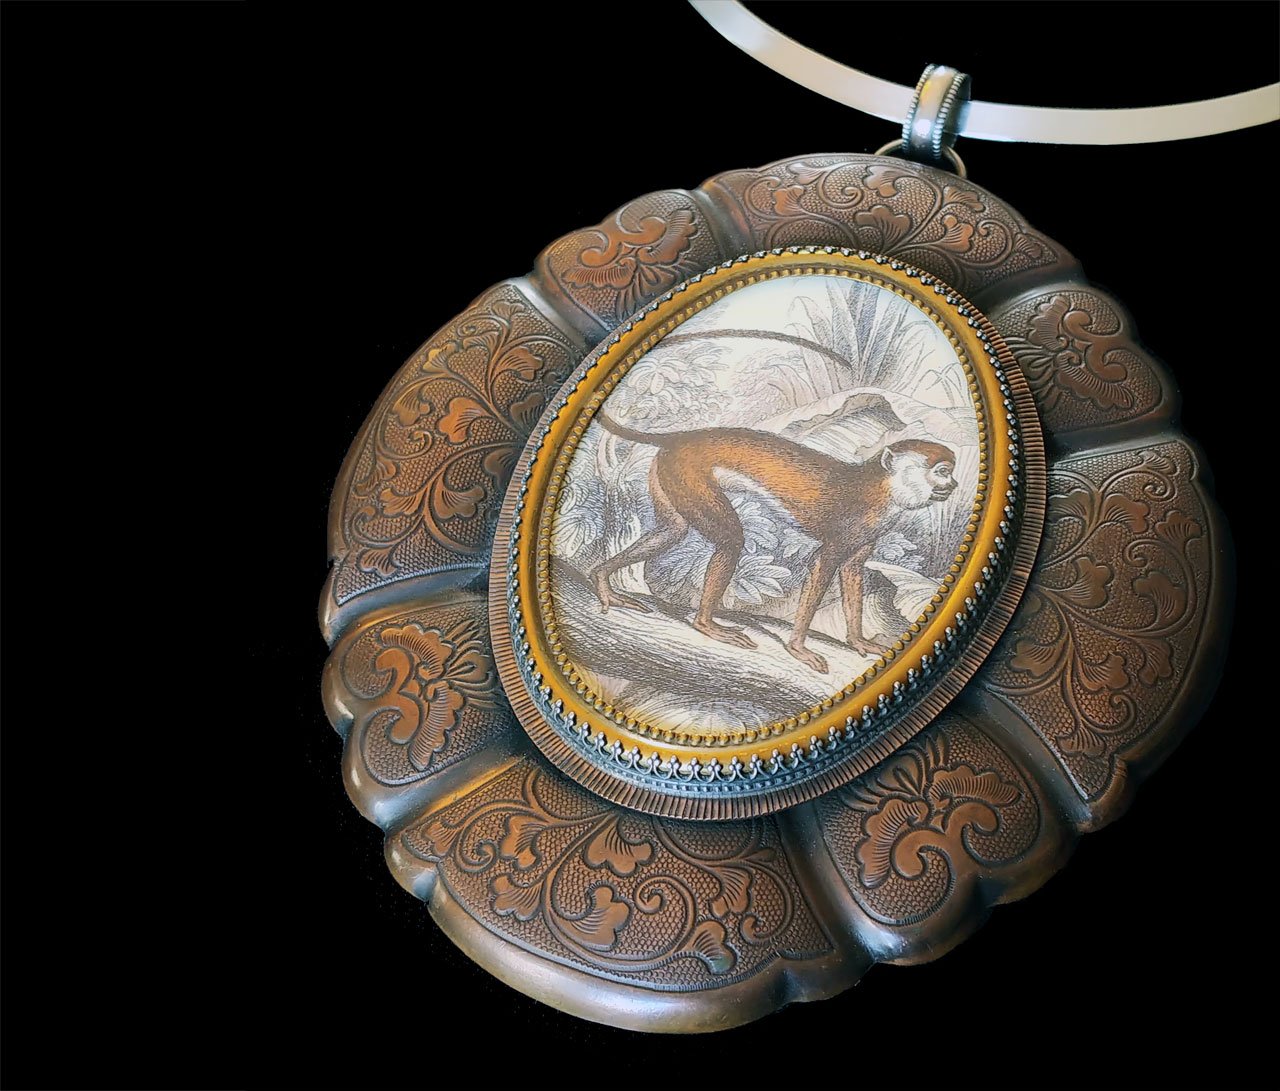   Gentle Friend Pendant  by Roberta &amp; David Williamson of vintage monkey print, sterling silver, watchmakers crystal, bronze and copper; soldered, bezel set, roller printed, 2016. 